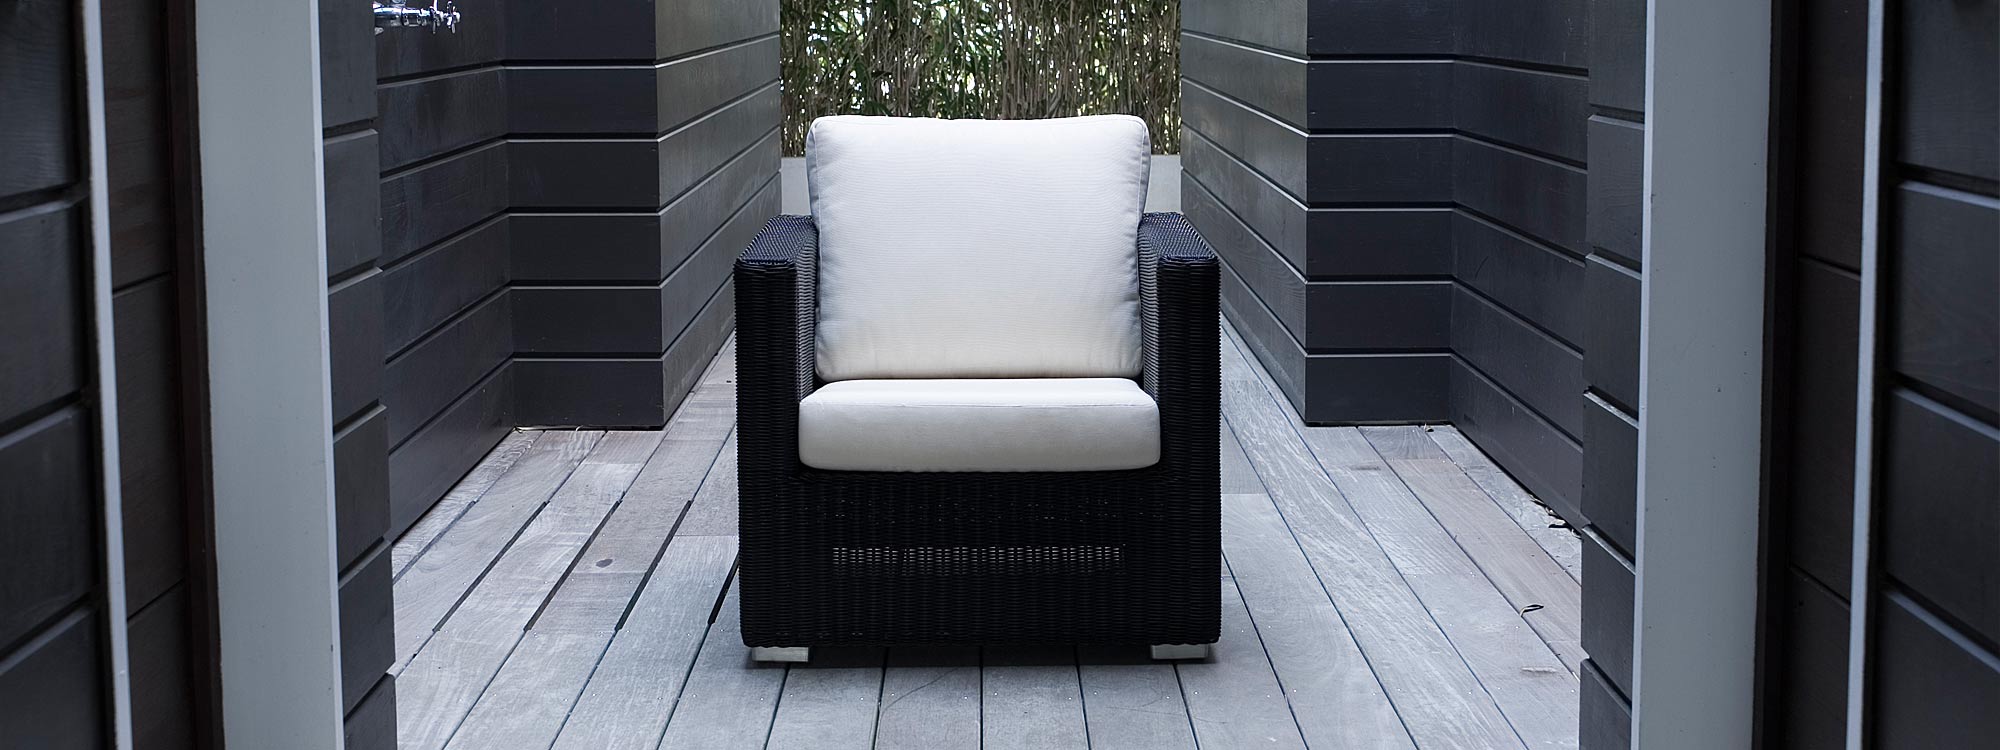 Image of black Chester rattan garden lounge chair with white cushions by Cane-line